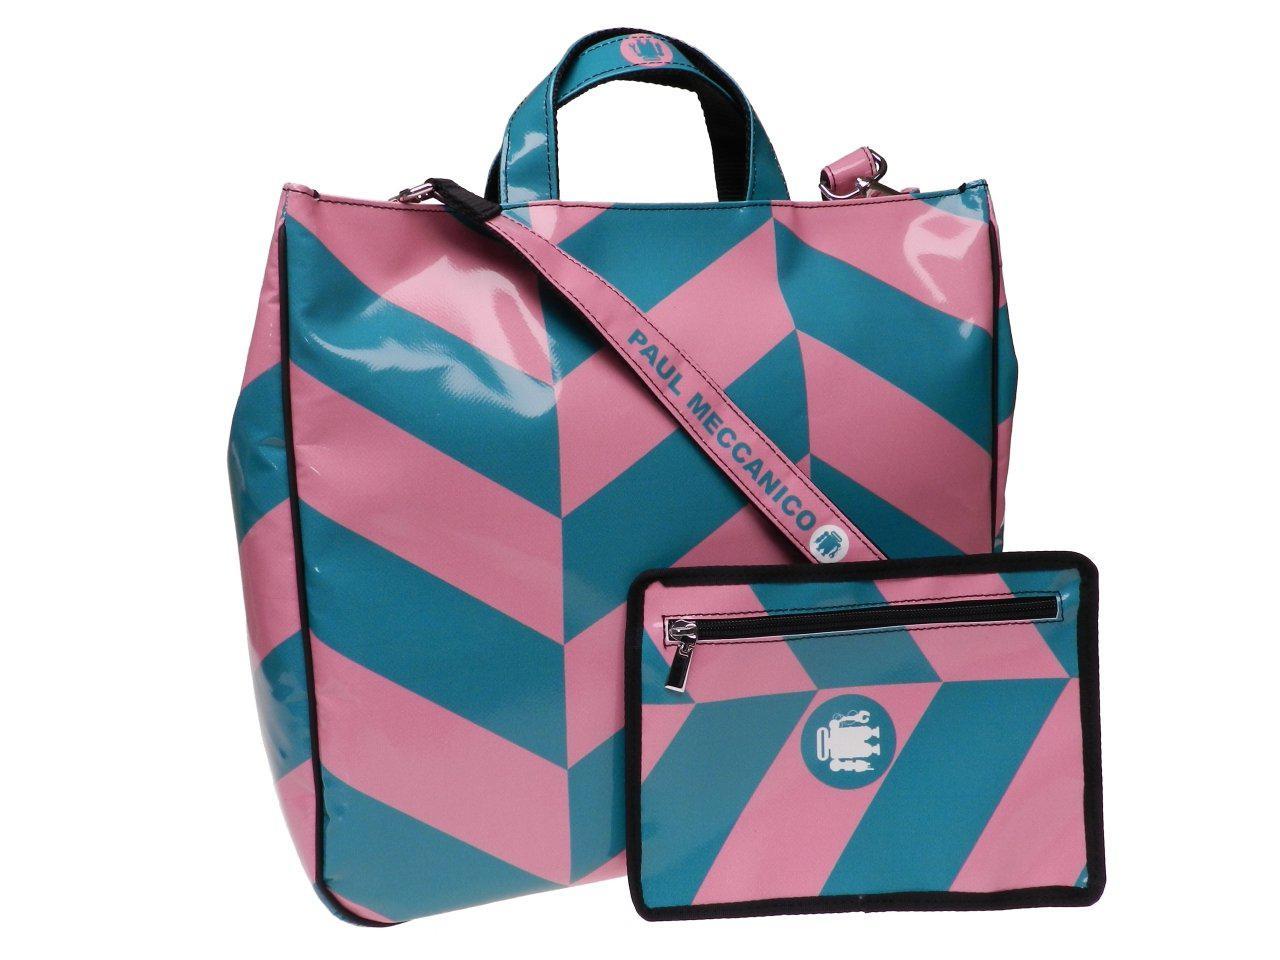 MAXI TOTE BAG PINK AND TEAL WITH GEOMETRIC FANTASY. MODEL AIRSTONE MADE OF LORRY TARPAULIN. - Unique Pieces Paul Meccanico